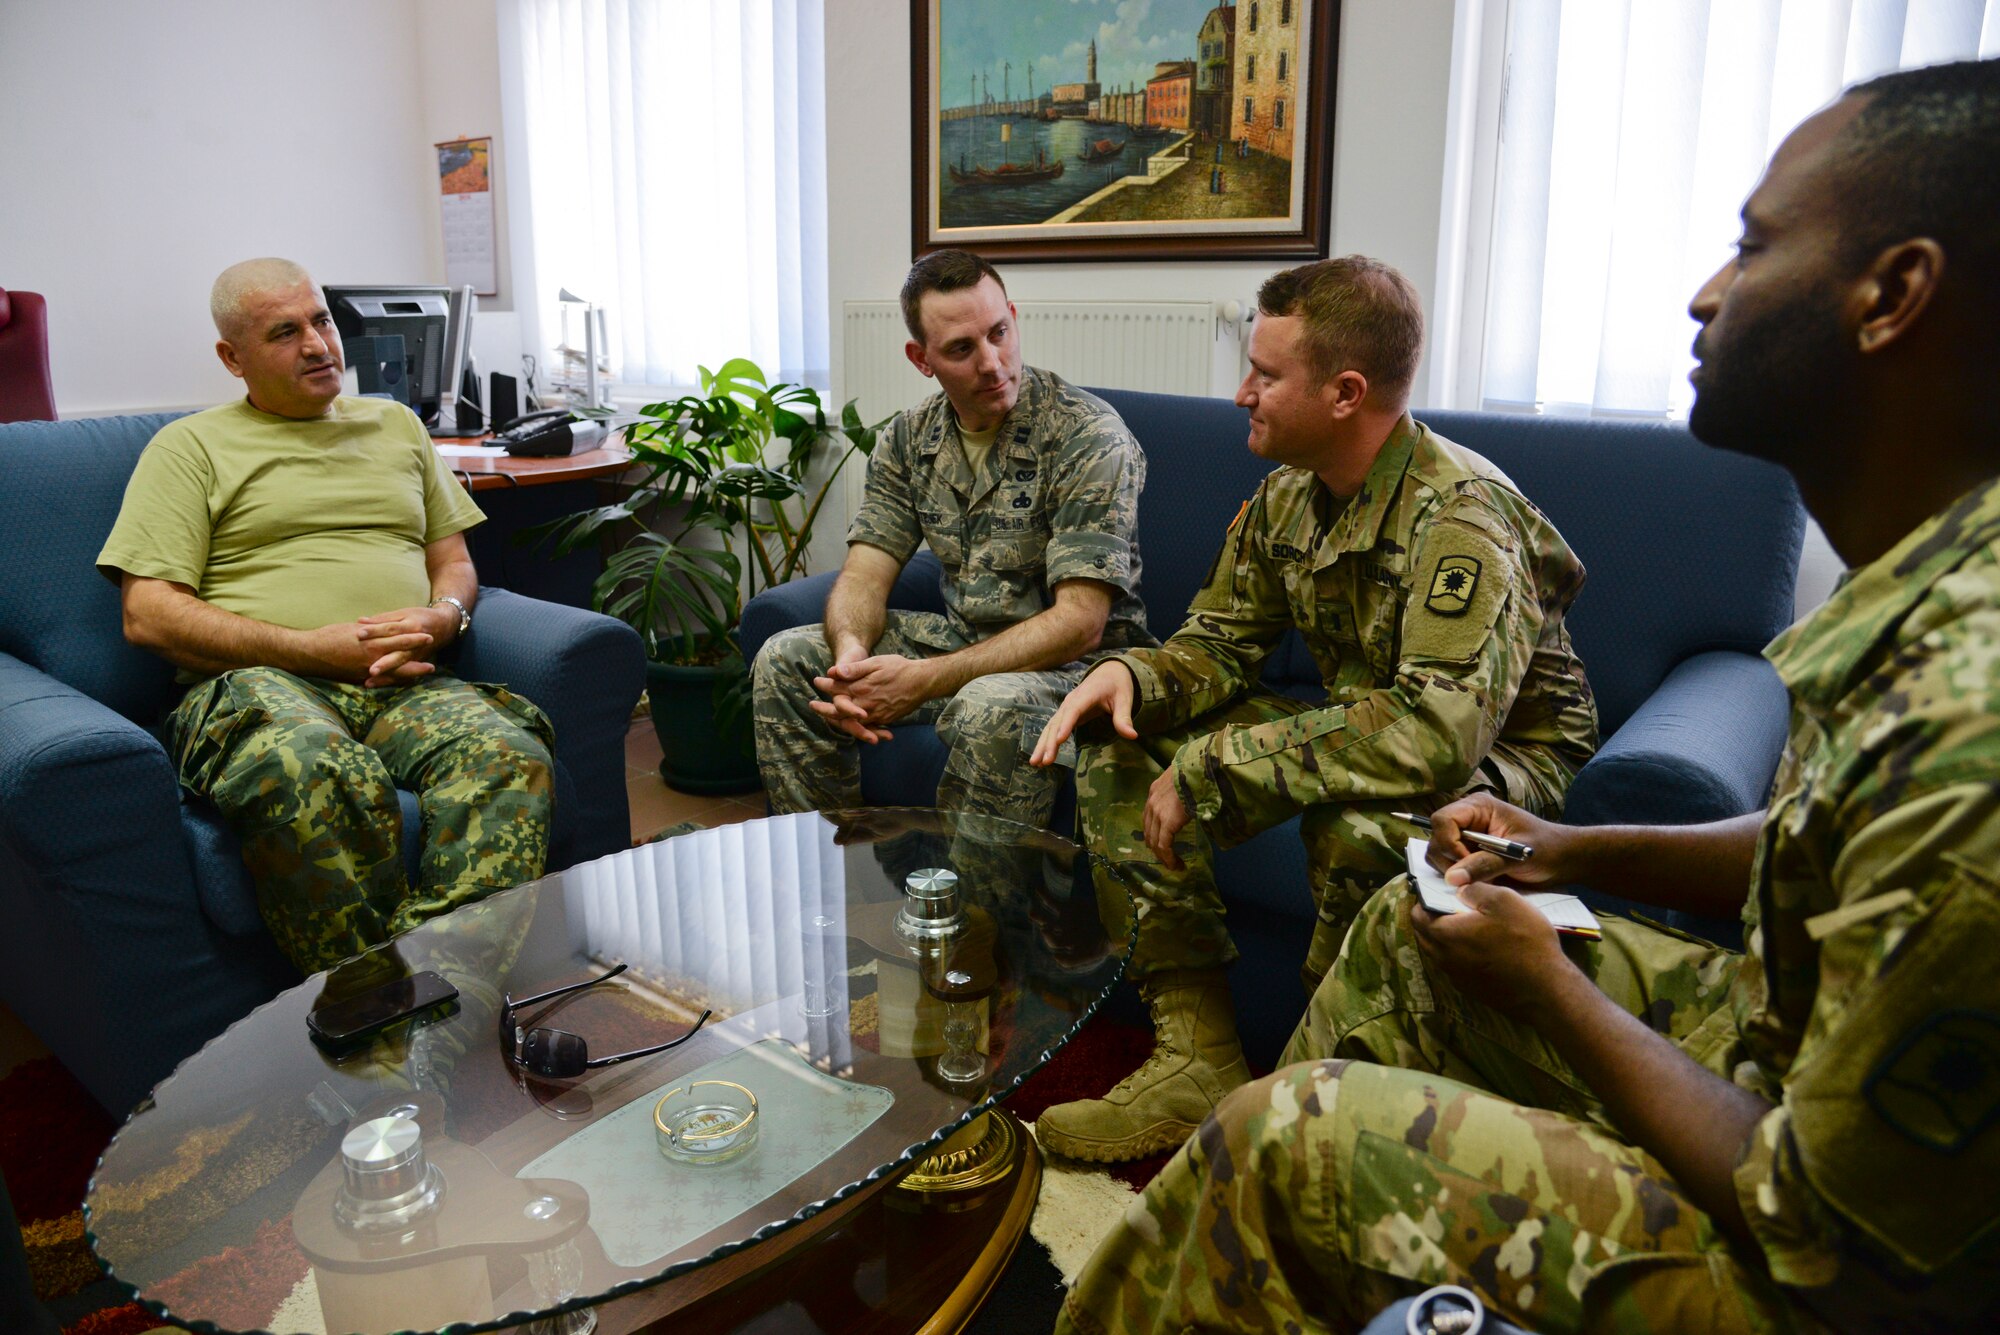 A picture of Albanian Army Lt. Col. Ali Mali, Commander of the 1st Infantry Battalion of the Albanian Land Forces, U.S. Air Force Capt. Andrew Matejek, 177th Fighter Wing Civil Engineer, and U.S. Army 1st Lt. John Sorich and Specialist Donald Patterson, 457th Civil Affairs Battalion discussing Humanitarian and Civic Assistance renovation projects.